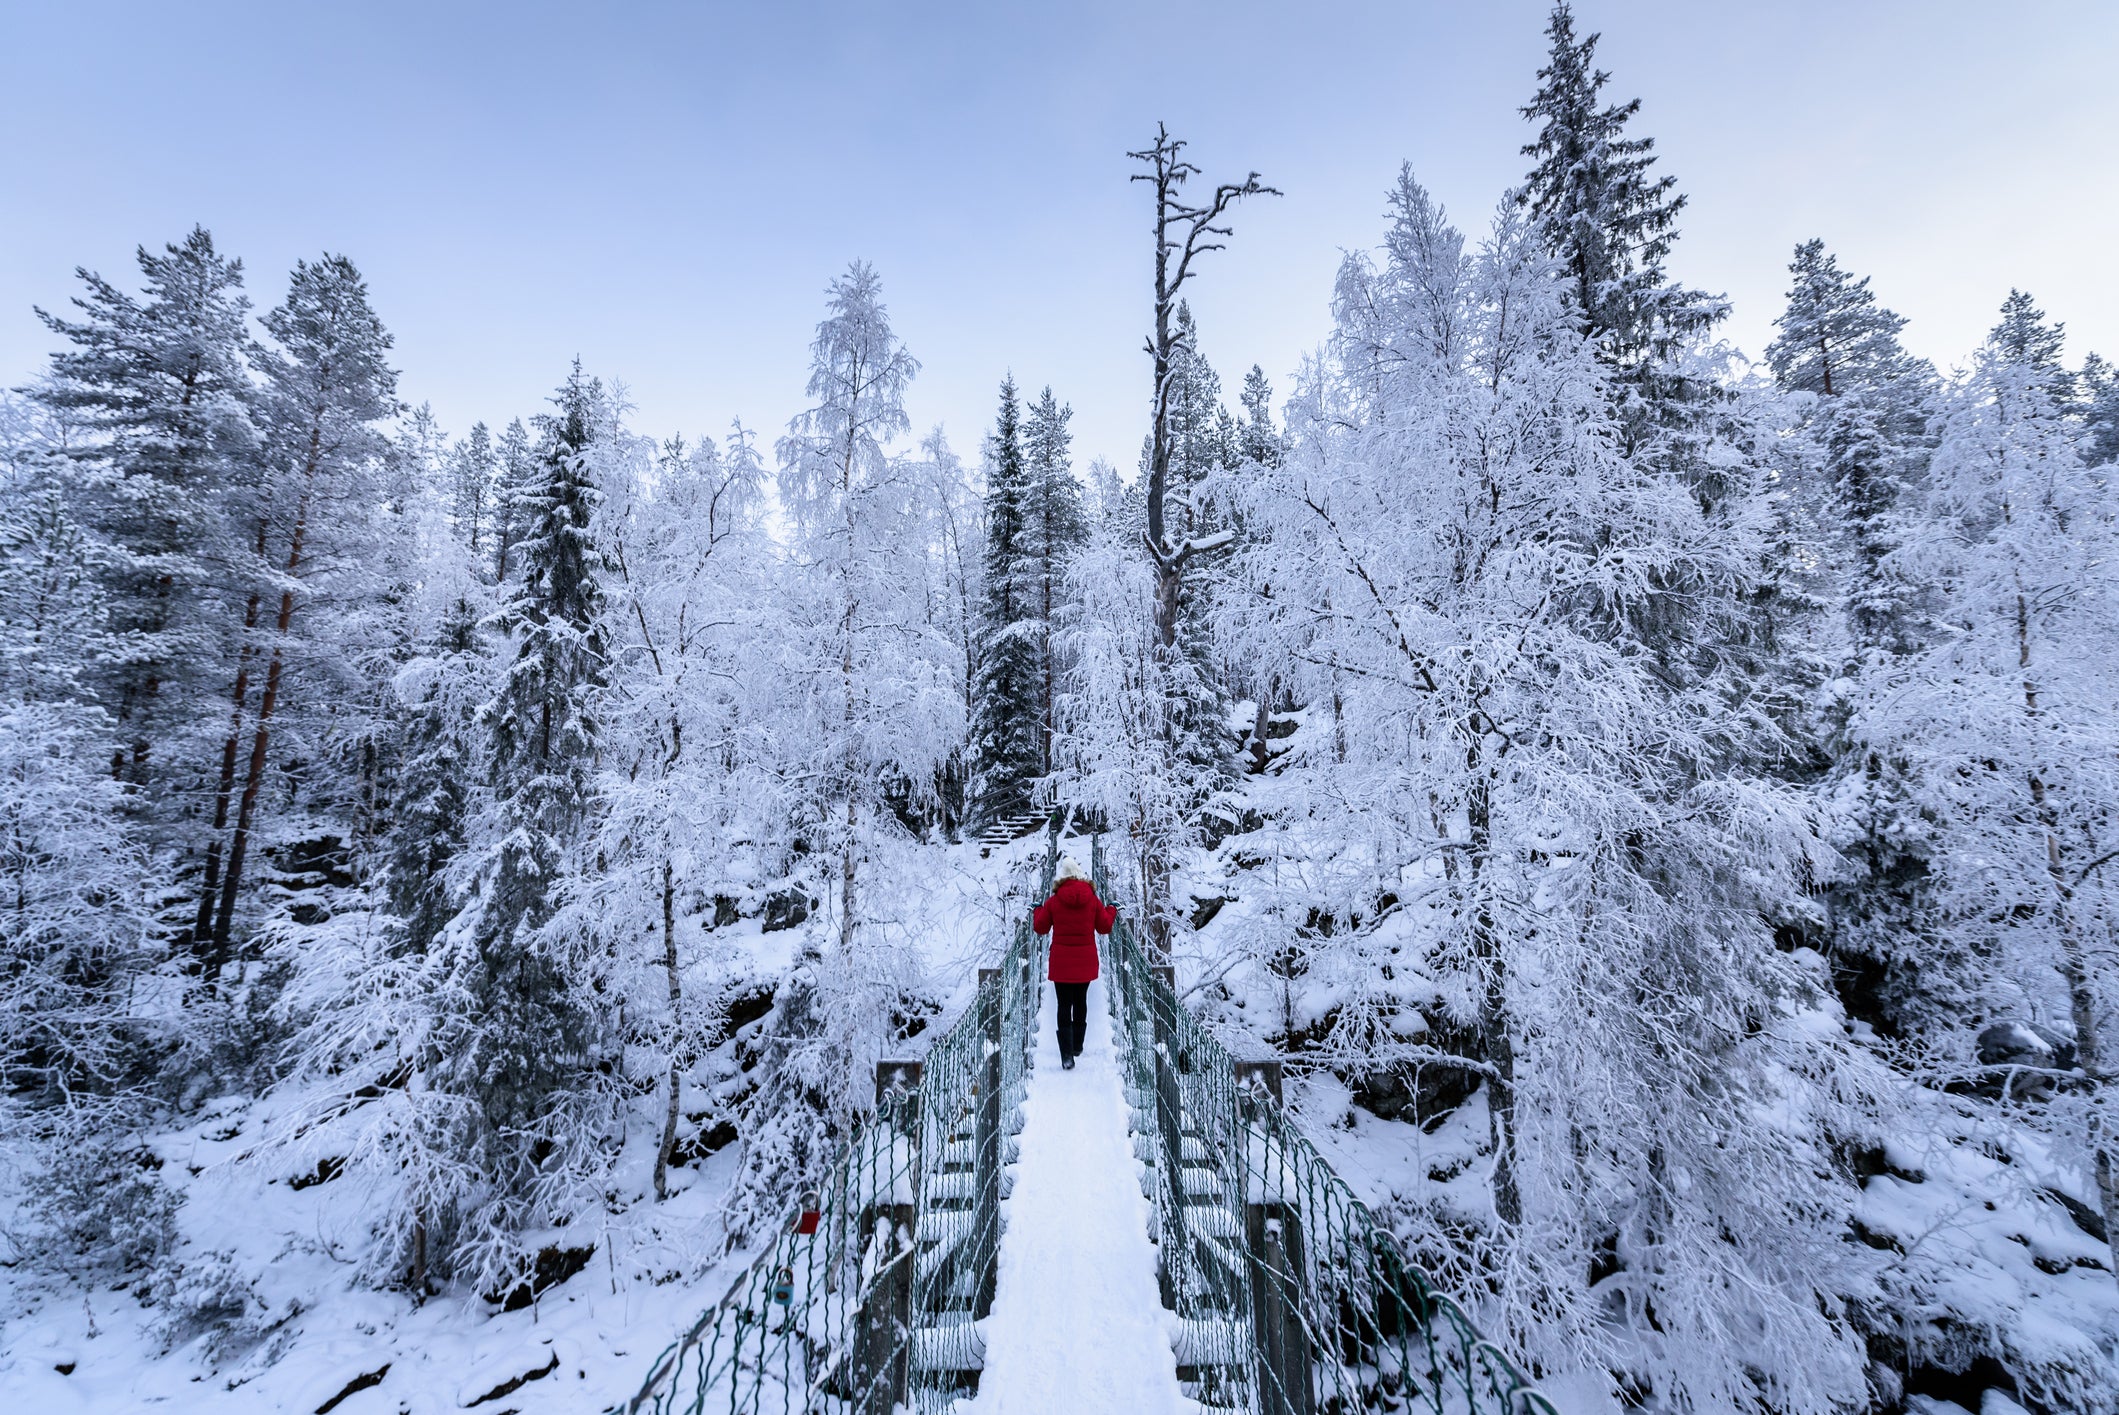 Tread the frozen Finnish wilderness by strapping on a pair of snowshoes